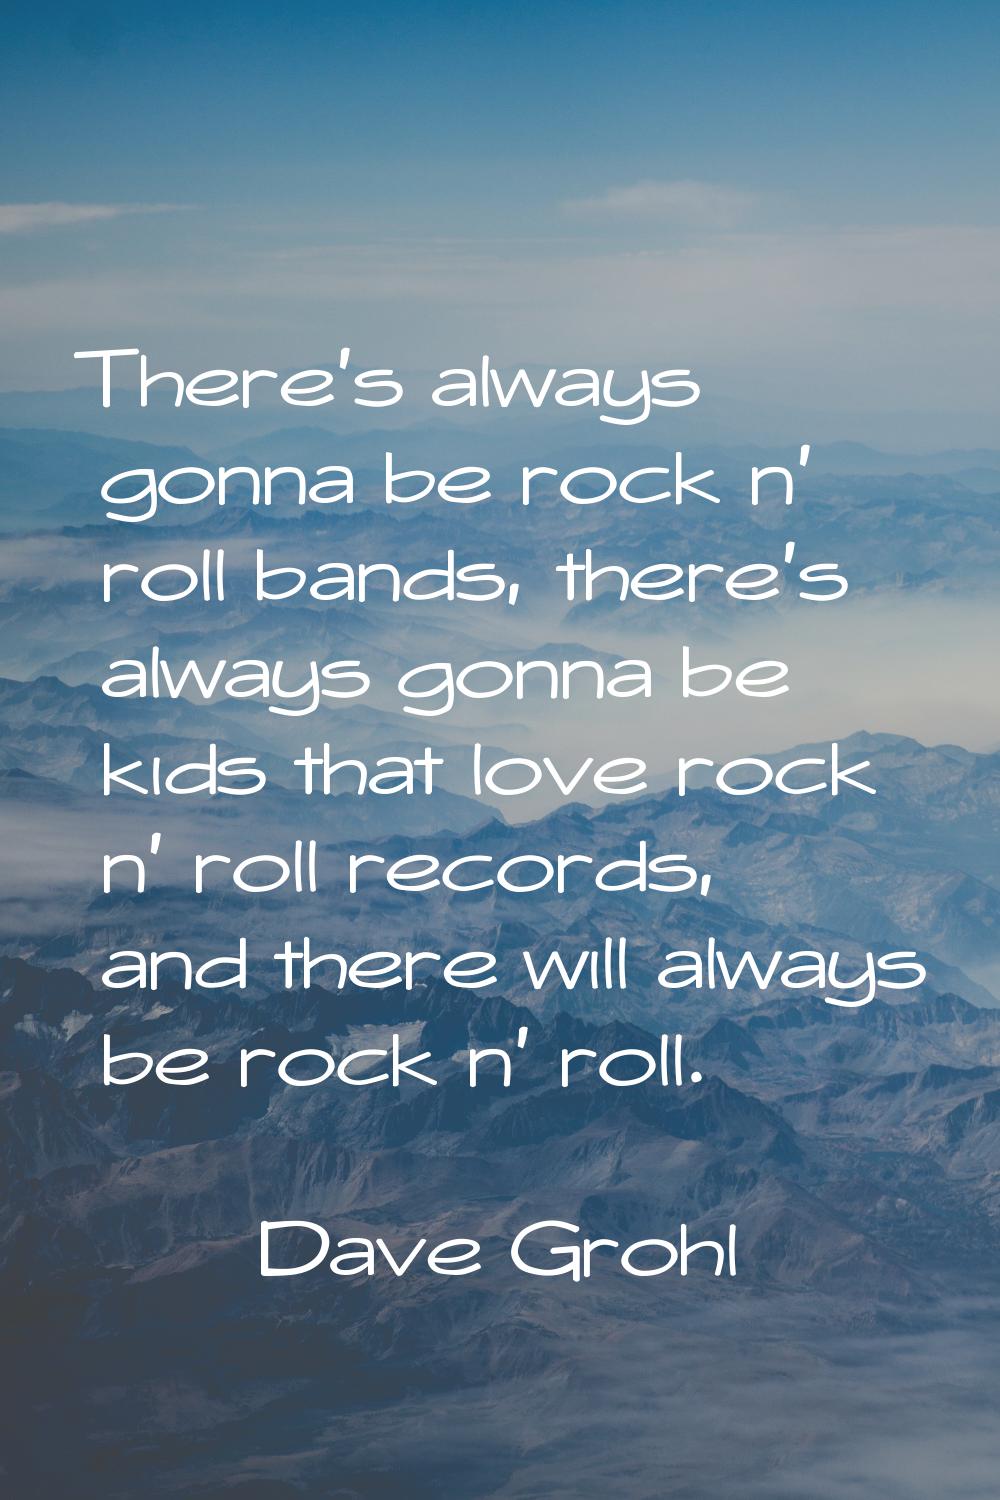 There's always gonna be rock n' roll bands, there's always gonna be kids that love rock n' roll rec